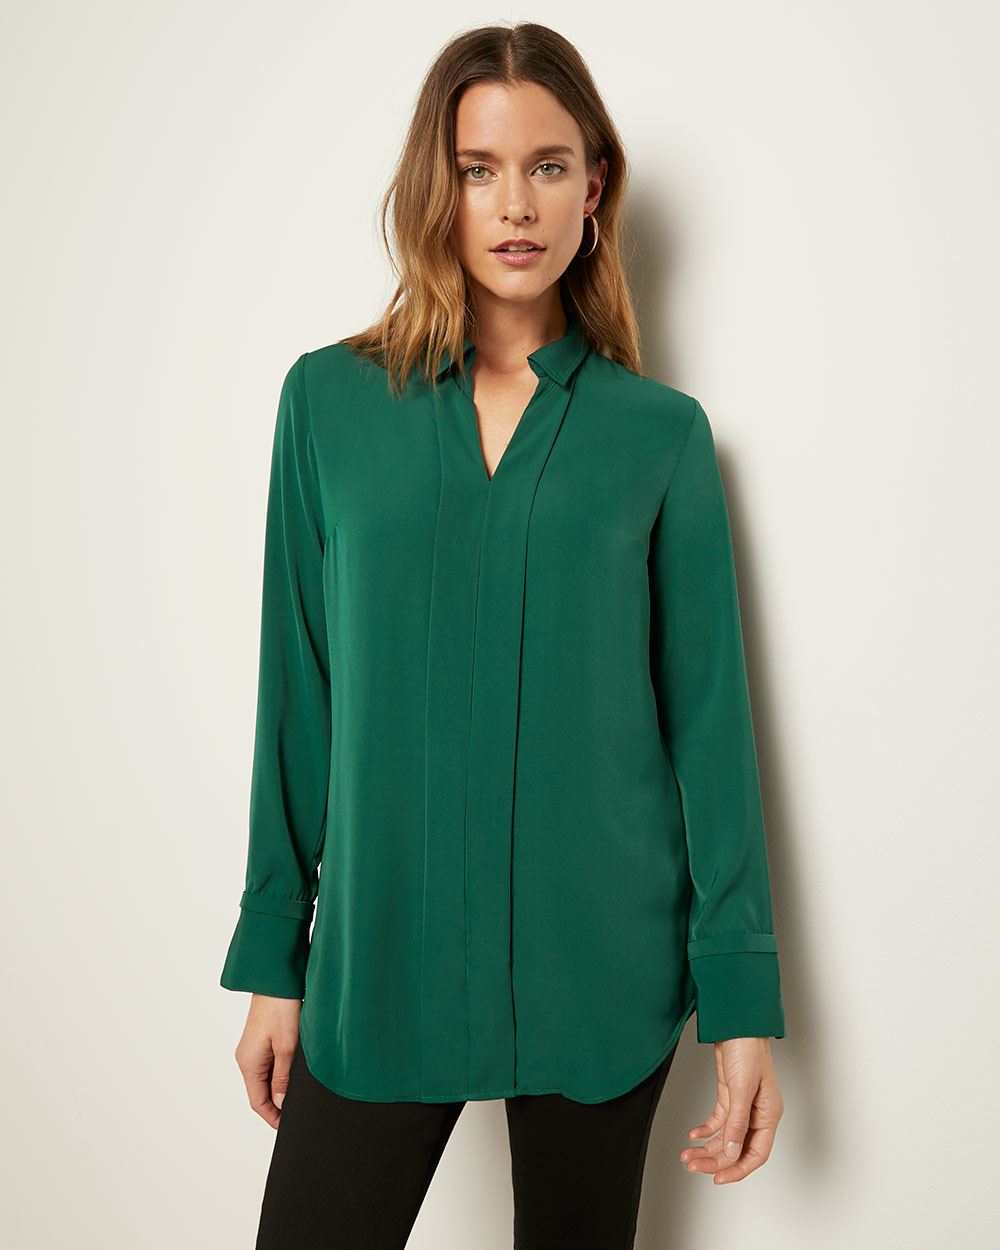 Long Sleeve Tunic Blouse with Pleats | RW&CO.